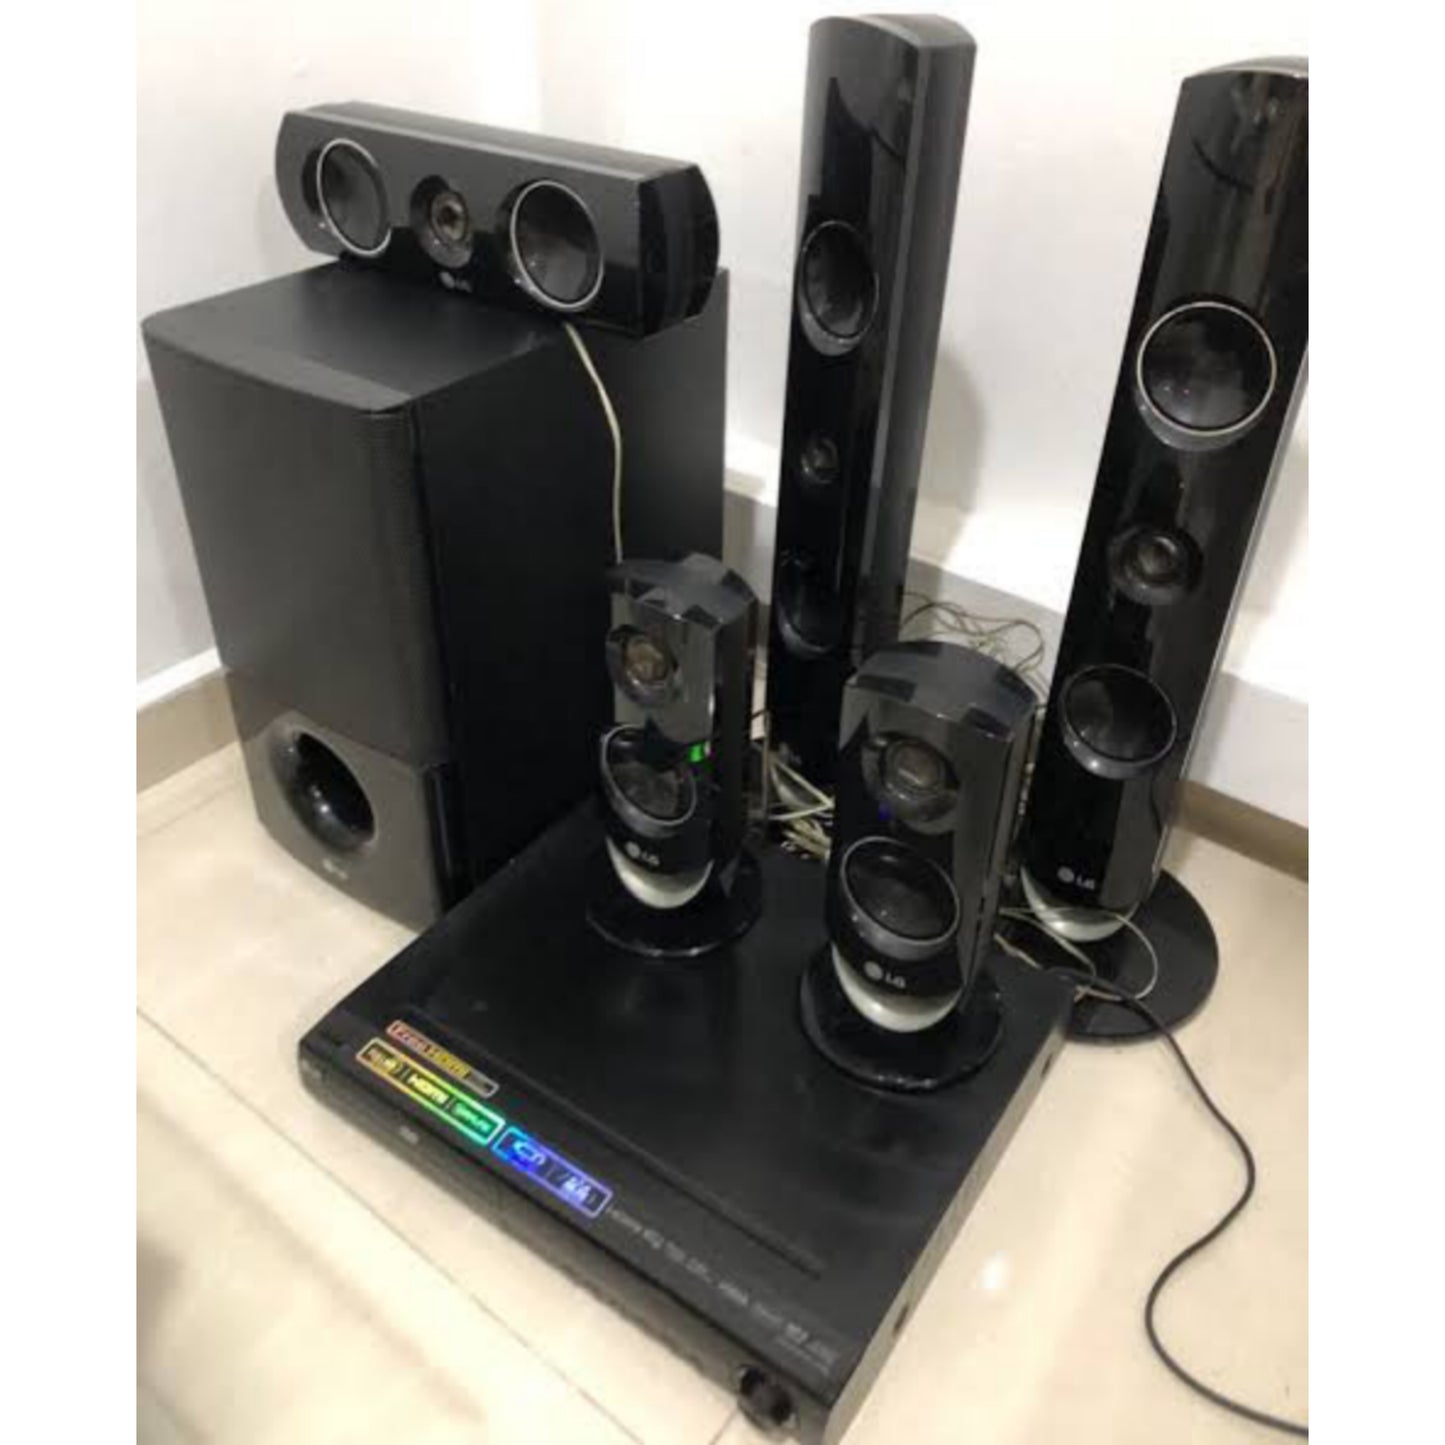 LG HT805PM 5.1Ch 850W Tall Boy DVD Home Theater System - Foreign Used